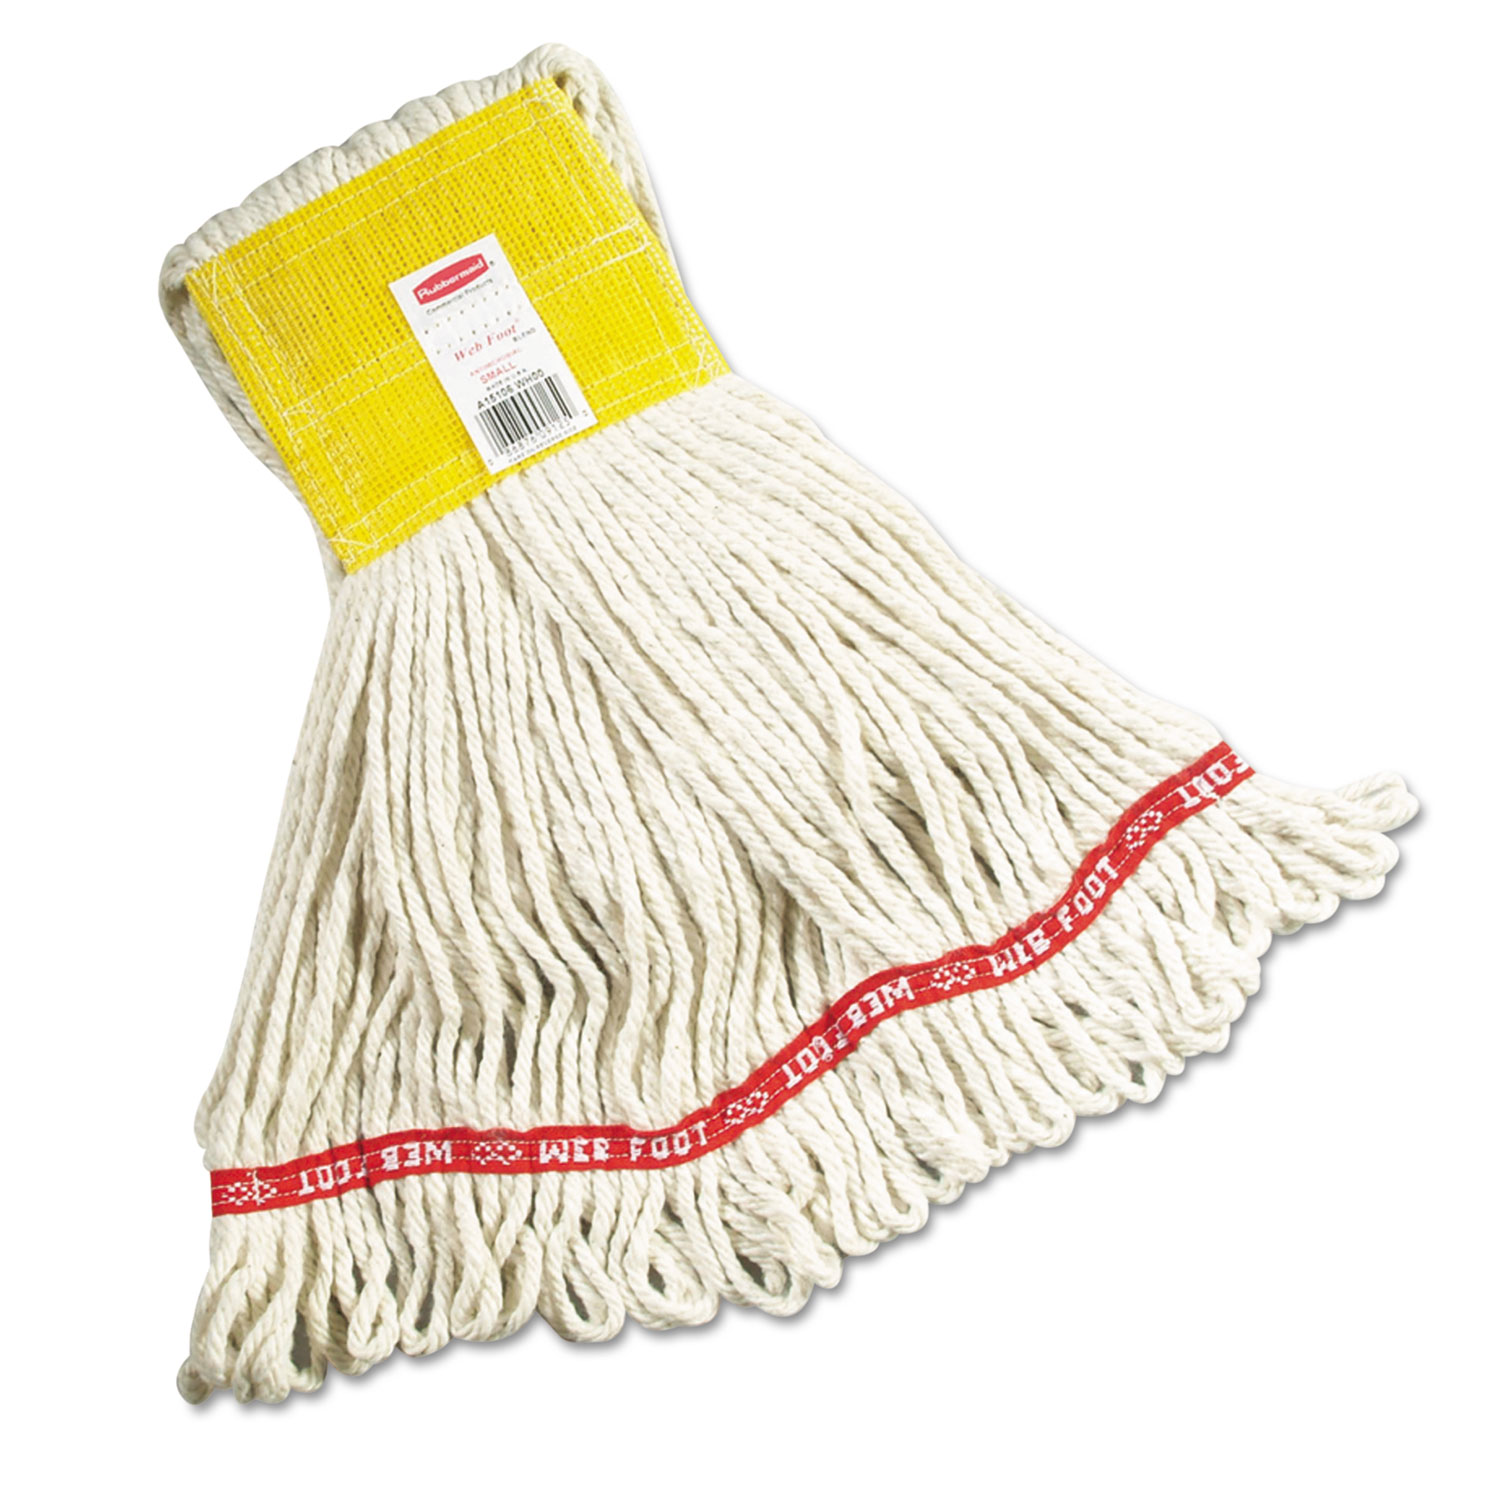 Rubbermaid® Commercial Web Foot Wet Mops, Cotton/Synthetic, White, Small, 5-in. Yellow Headband